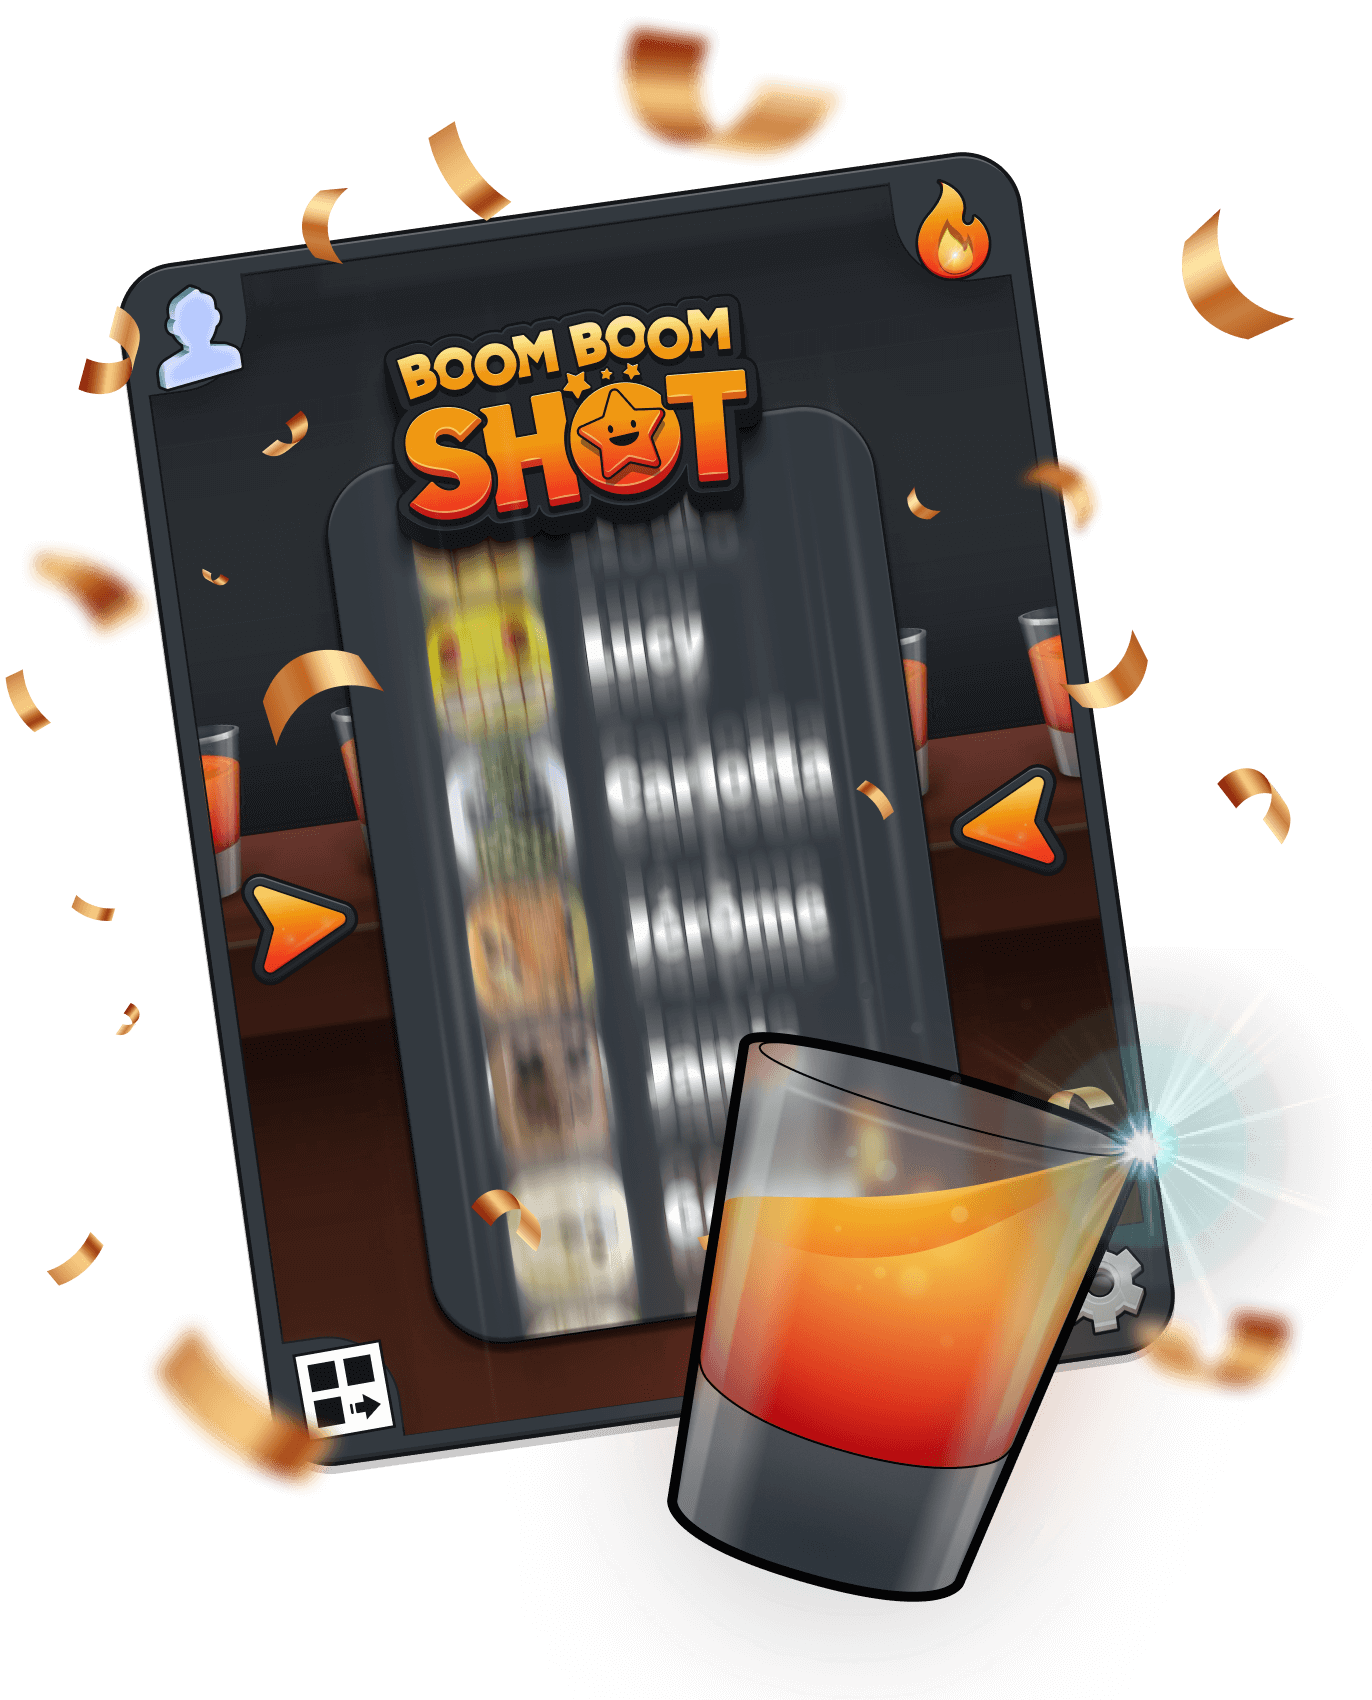 The sweepstakes giveaway app for events • Boom Boom Shot